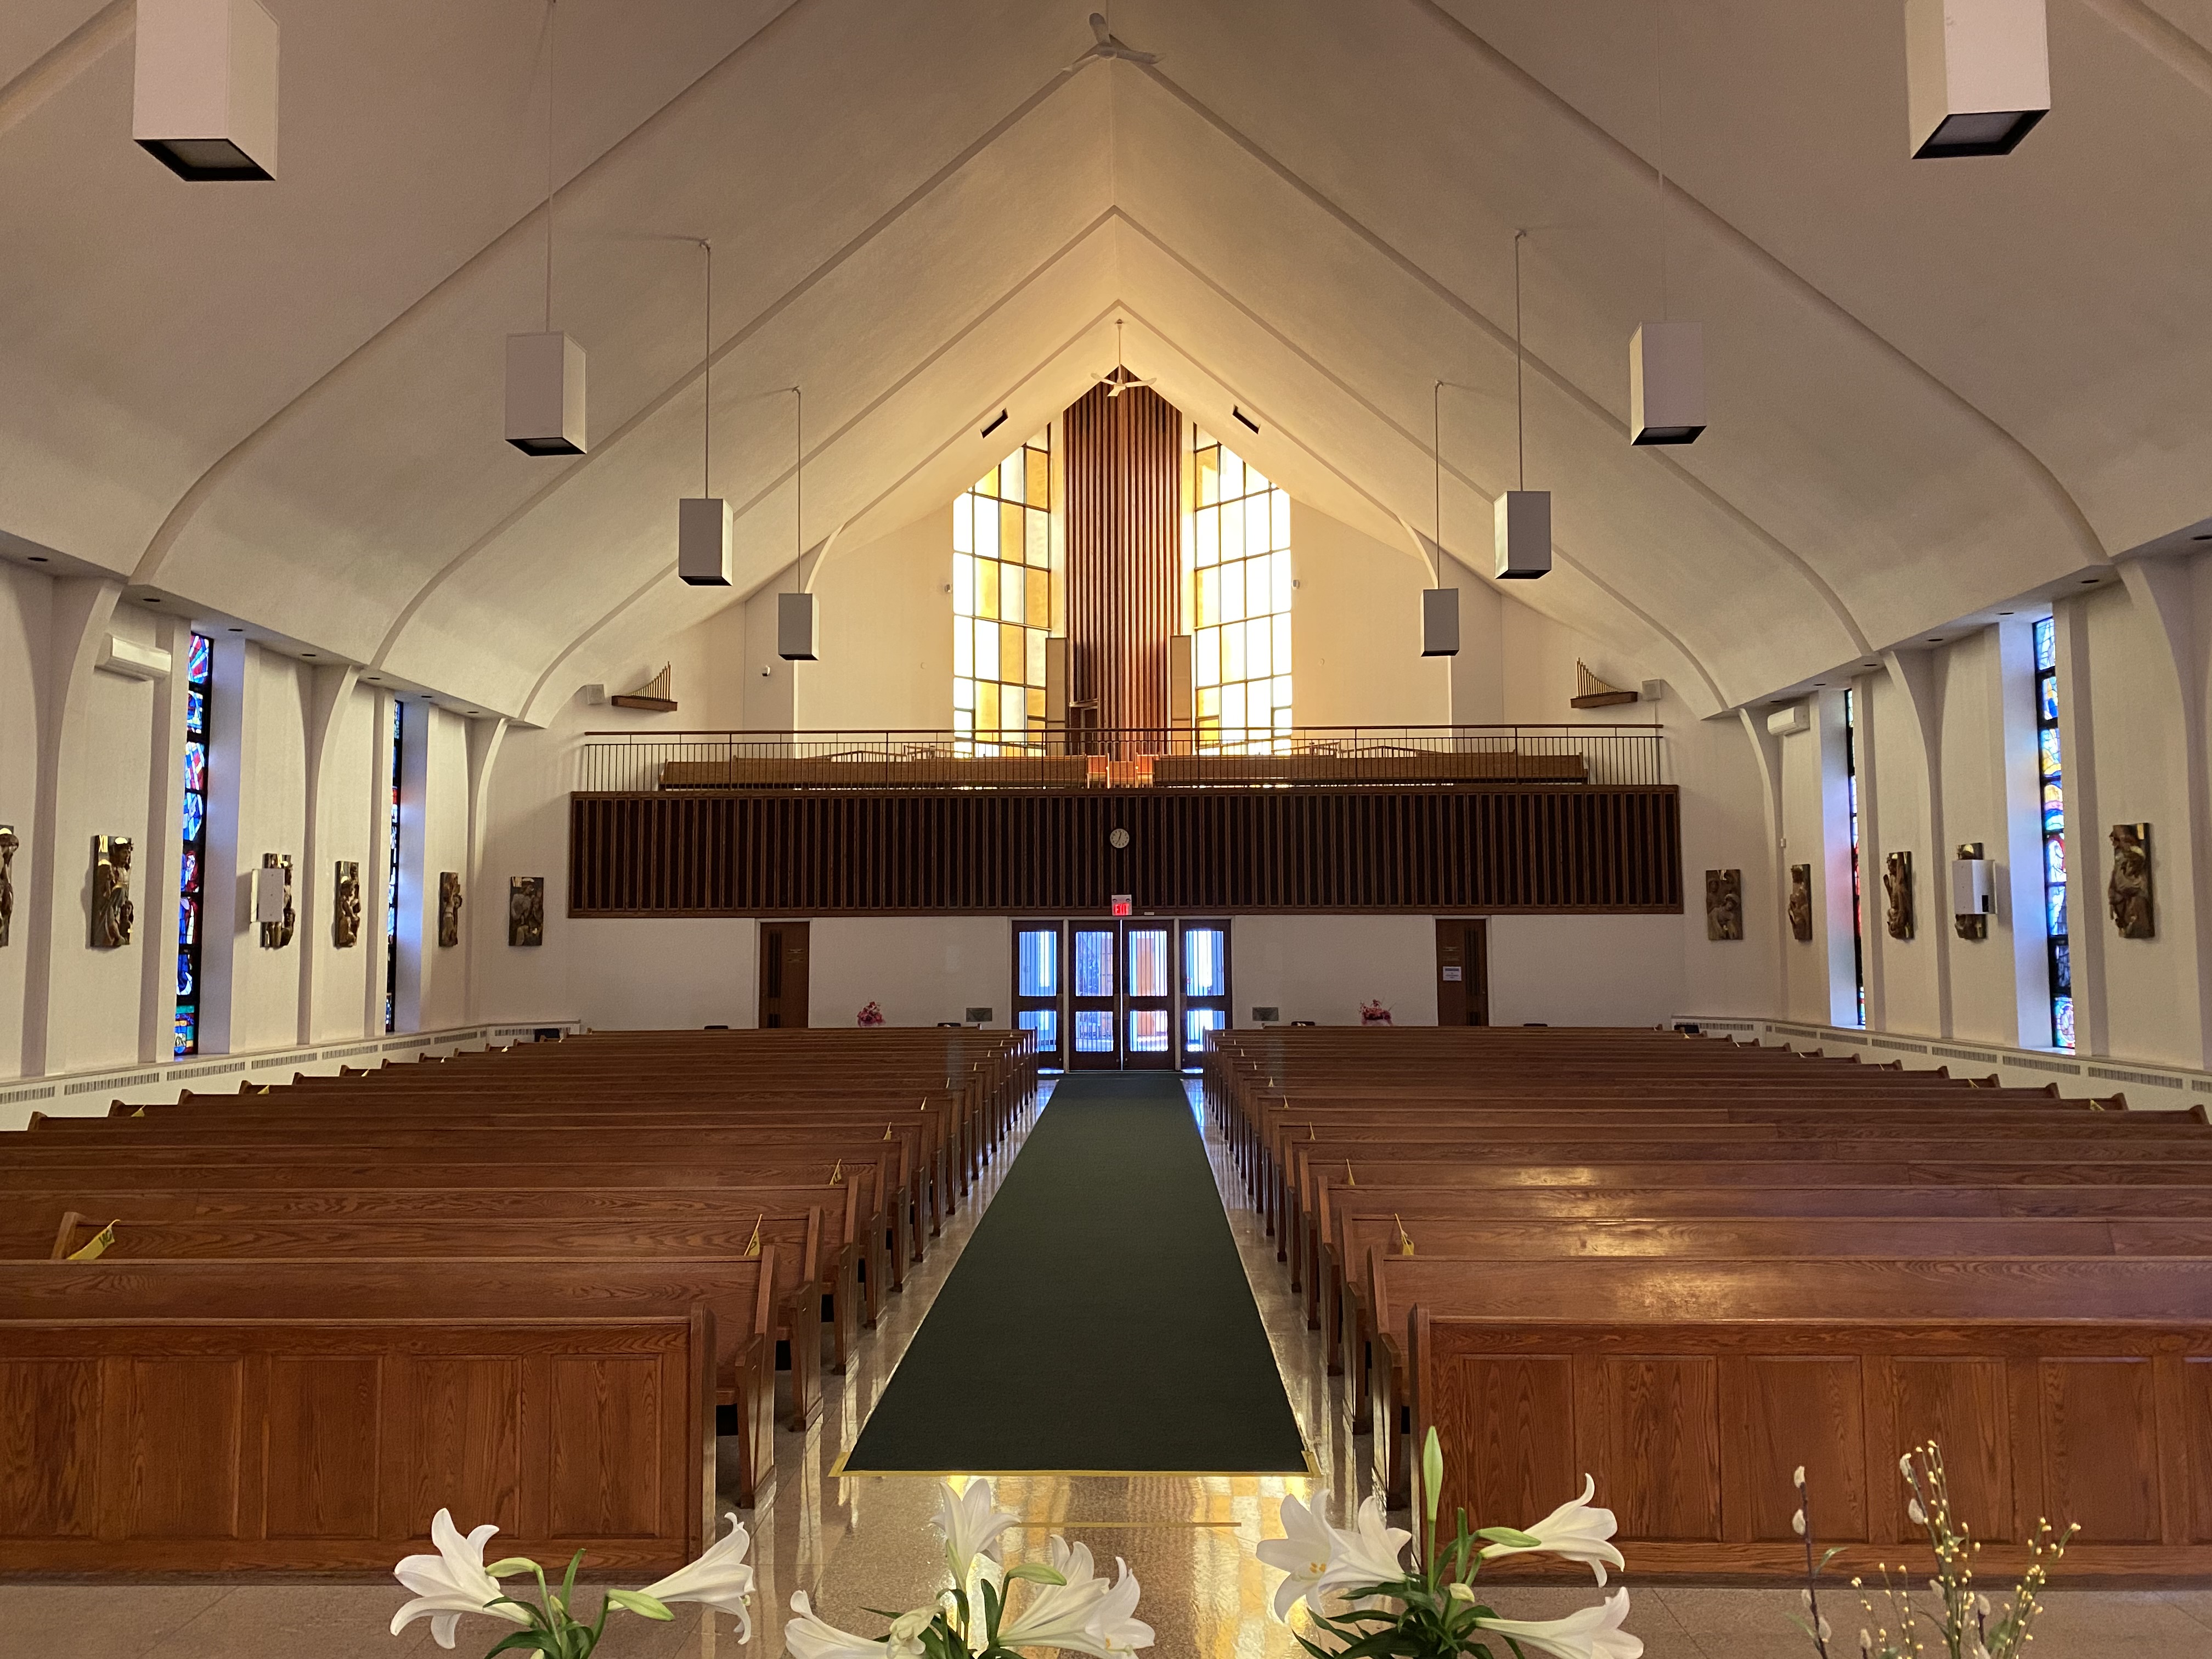 Church interior view from the altar facing pews